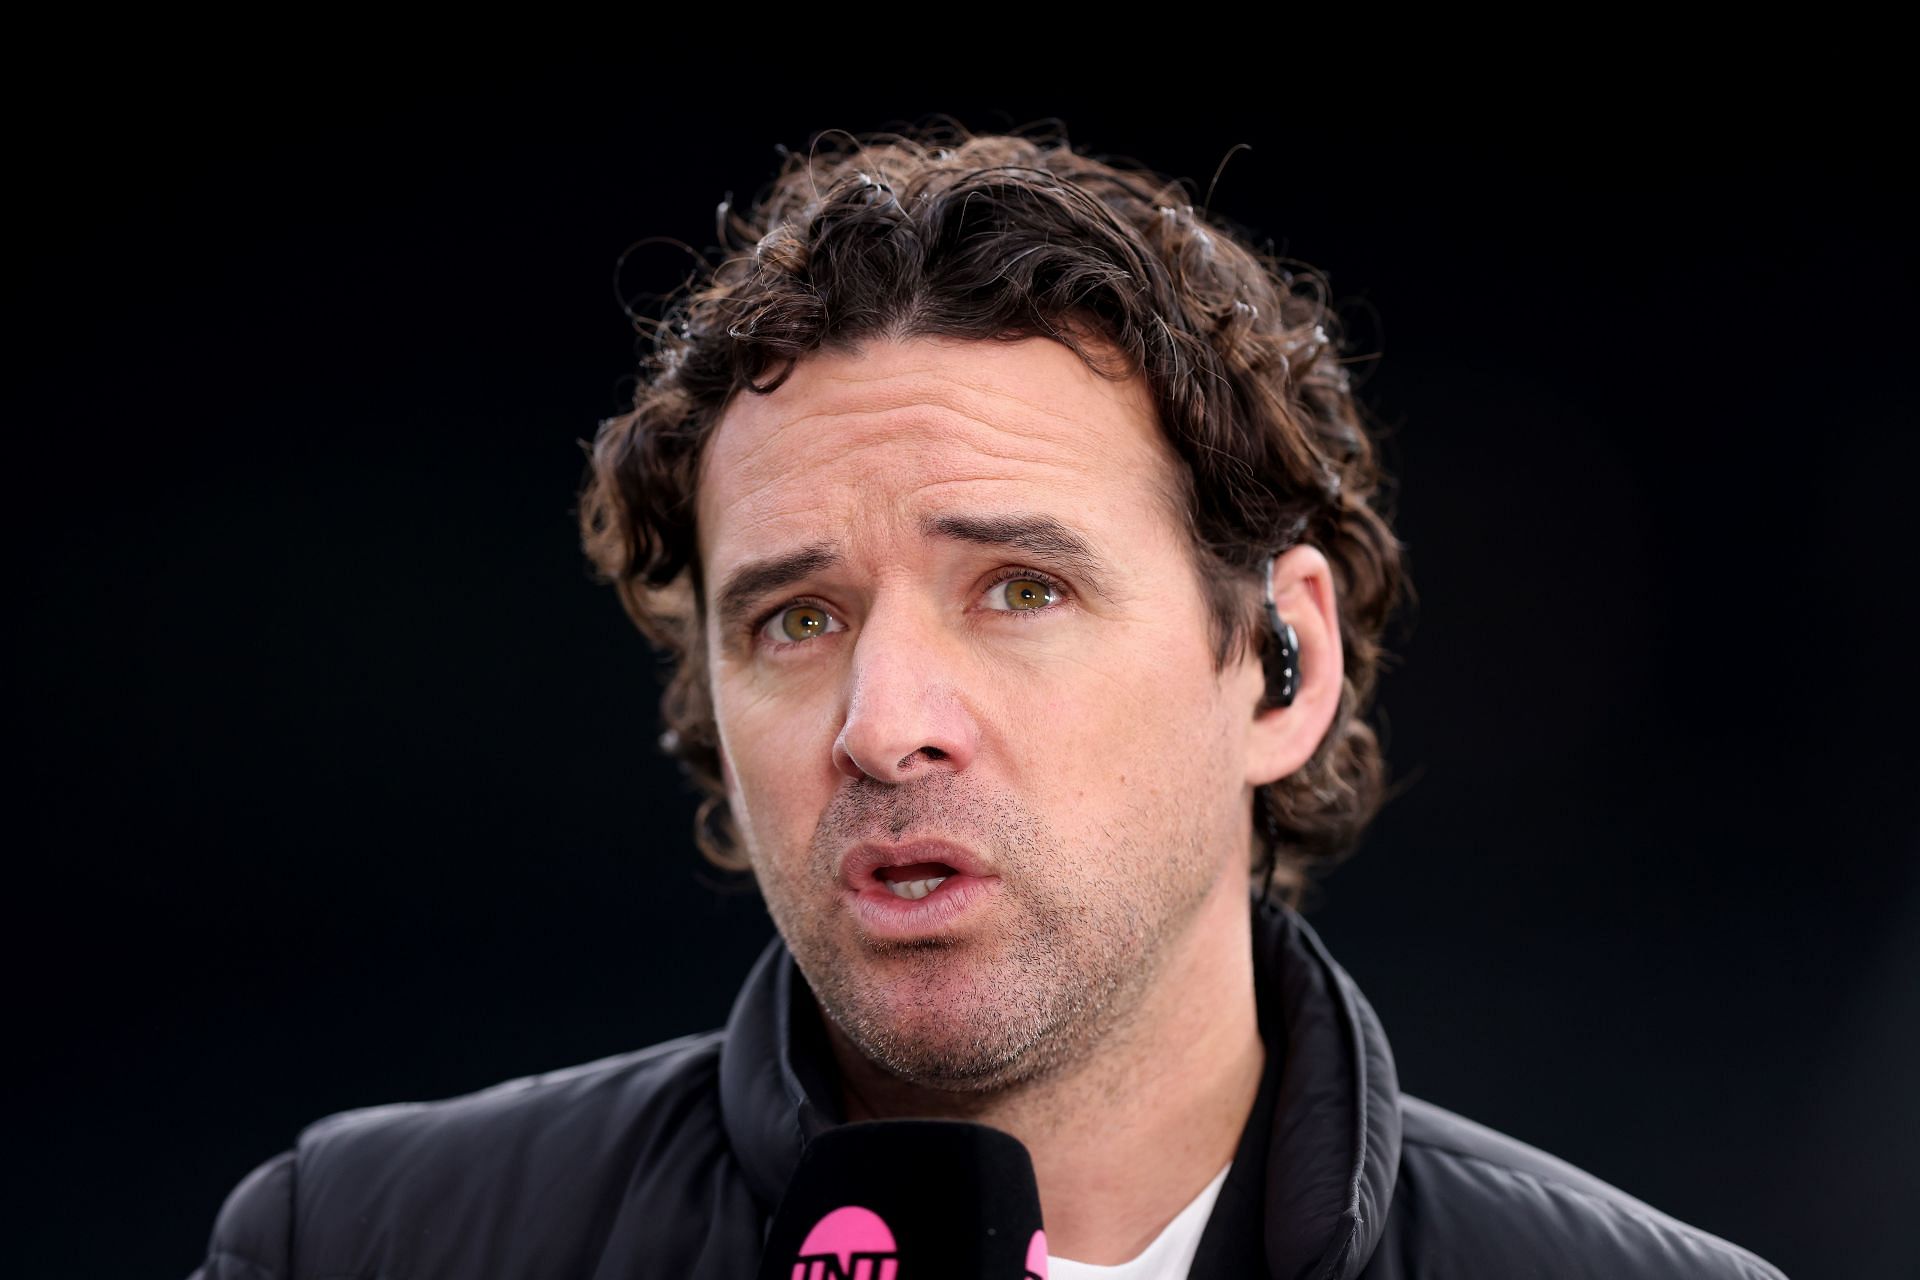 Owen Hargreaves thinks the Gunners will come out on top.